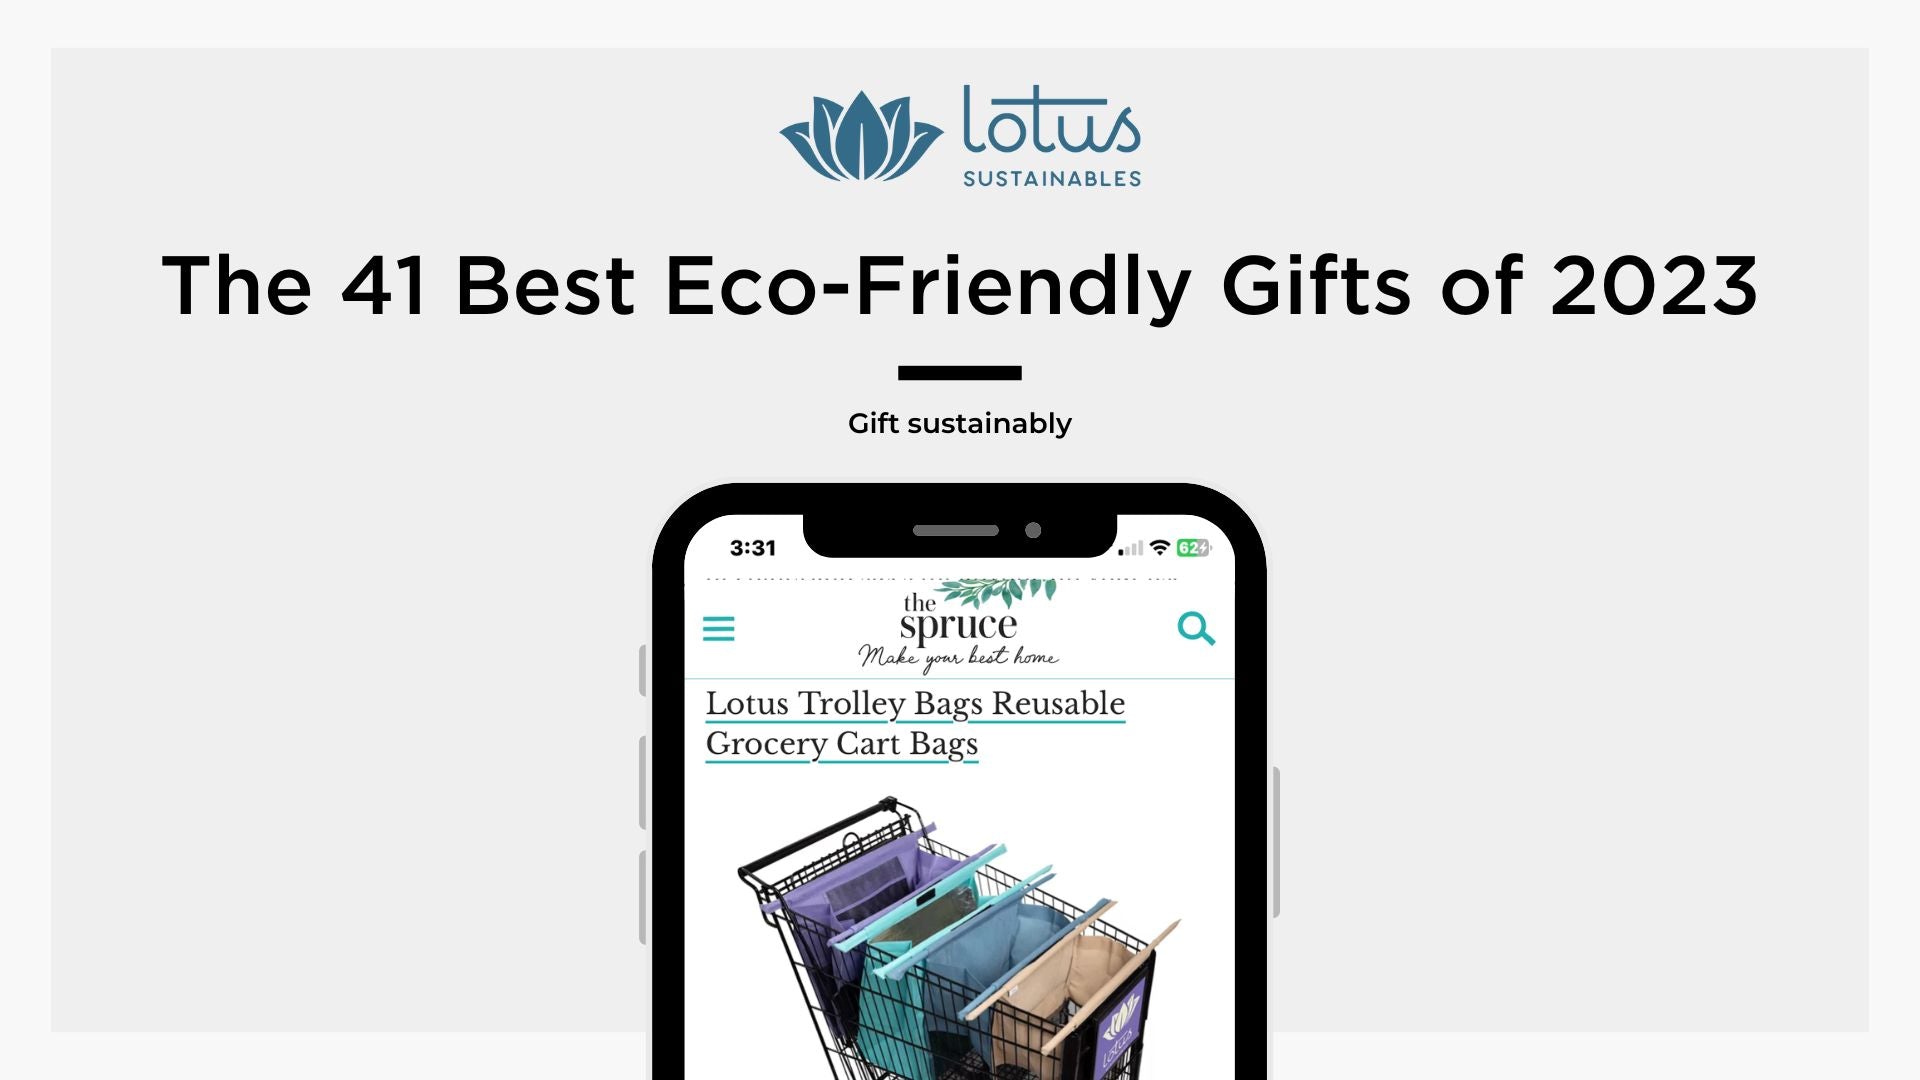 Lotus Sustainables Independently Rated Best Eco-Friendly Gift of 2023